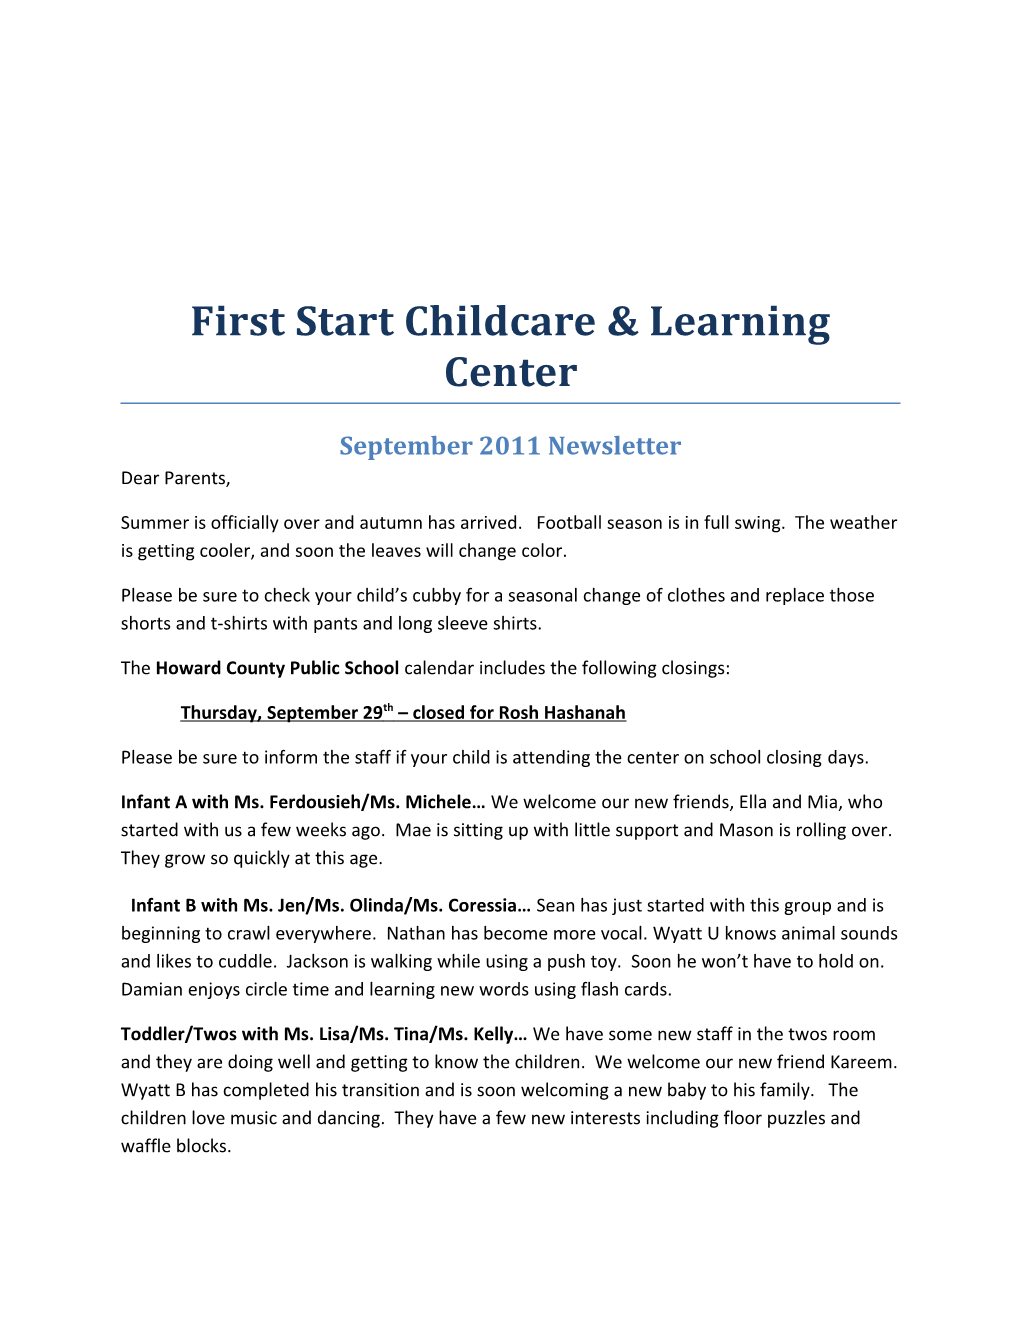 First Start Childcare & Learning Center